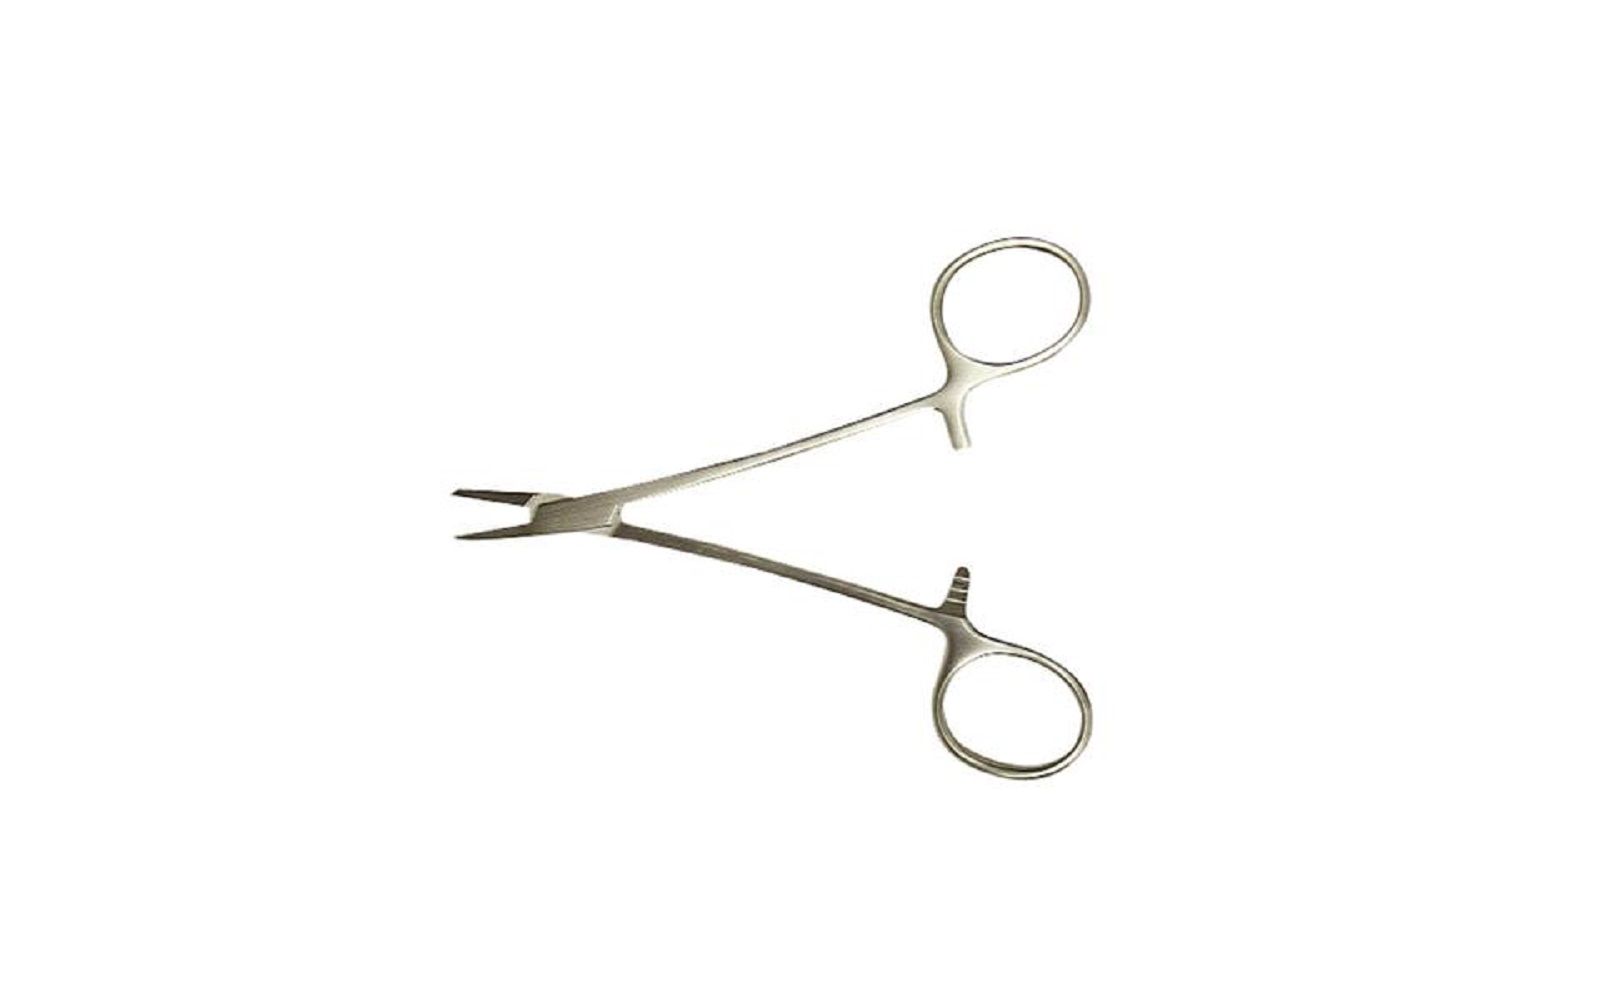 Patterson® needle holders – webster smooth